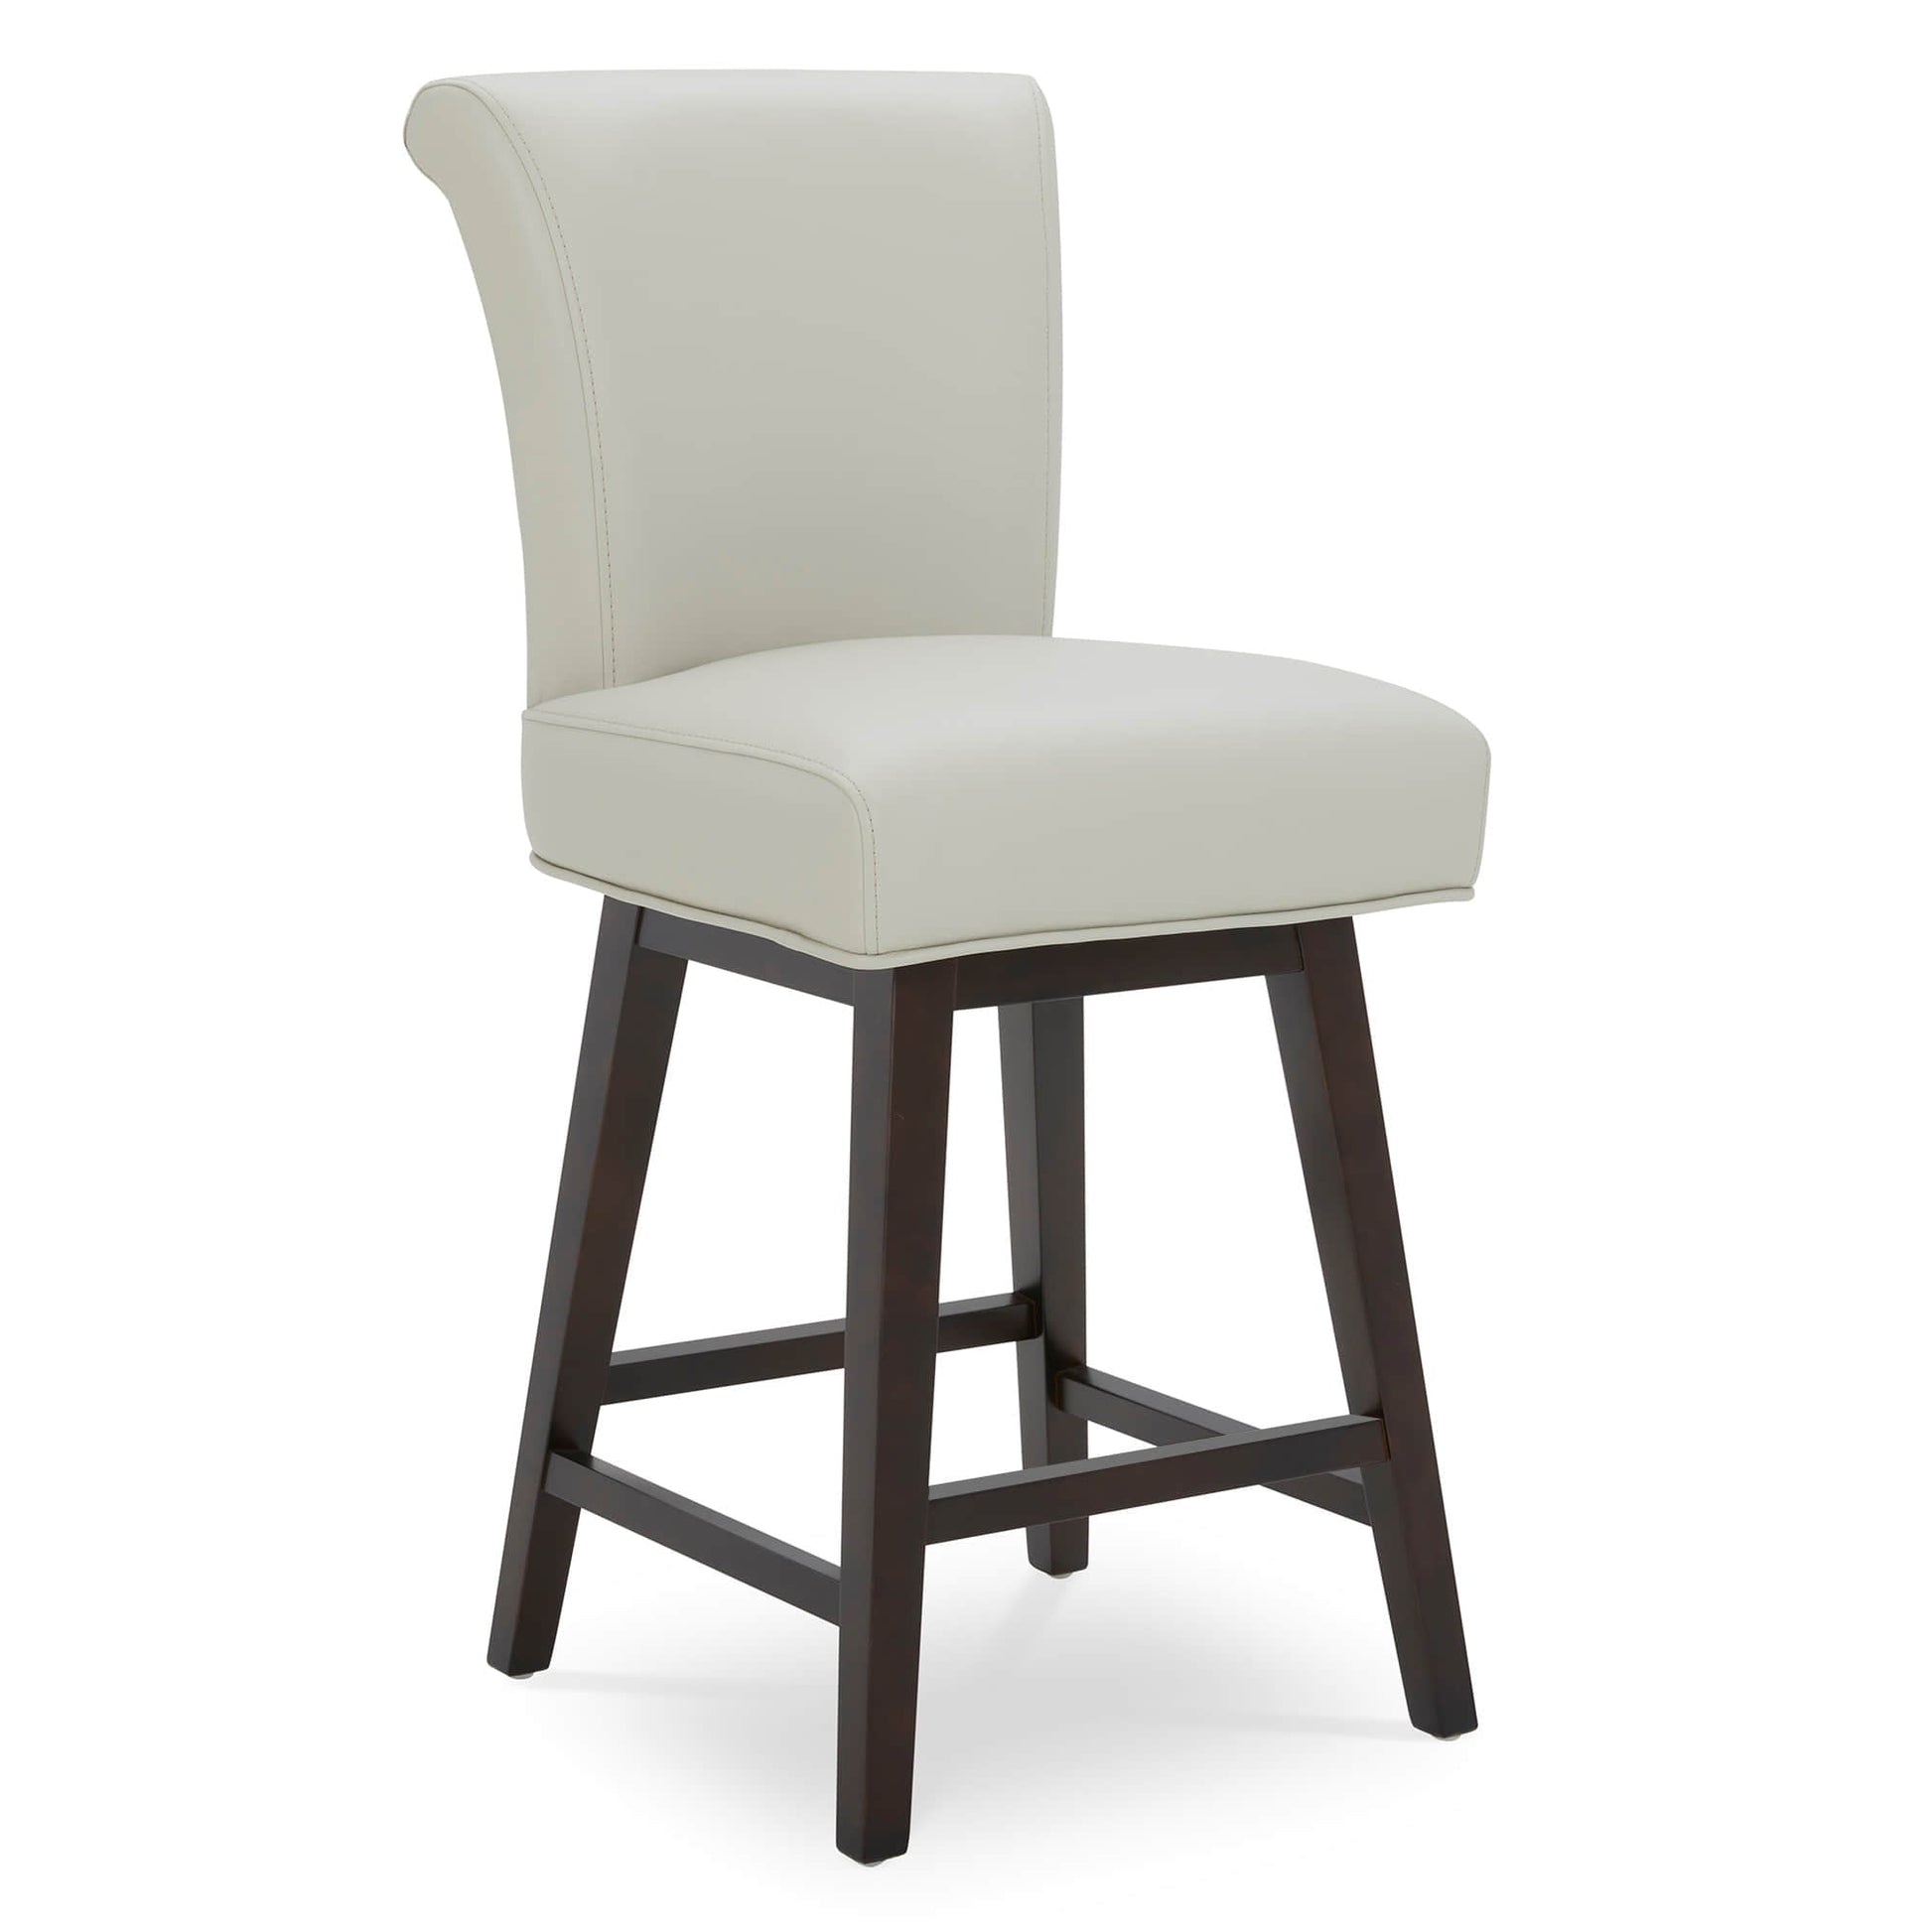 CHITA LIVING-Alina Modern Swivel Counter Stool-Counter Stools-Faux Leather-Light Gray-1-Pack